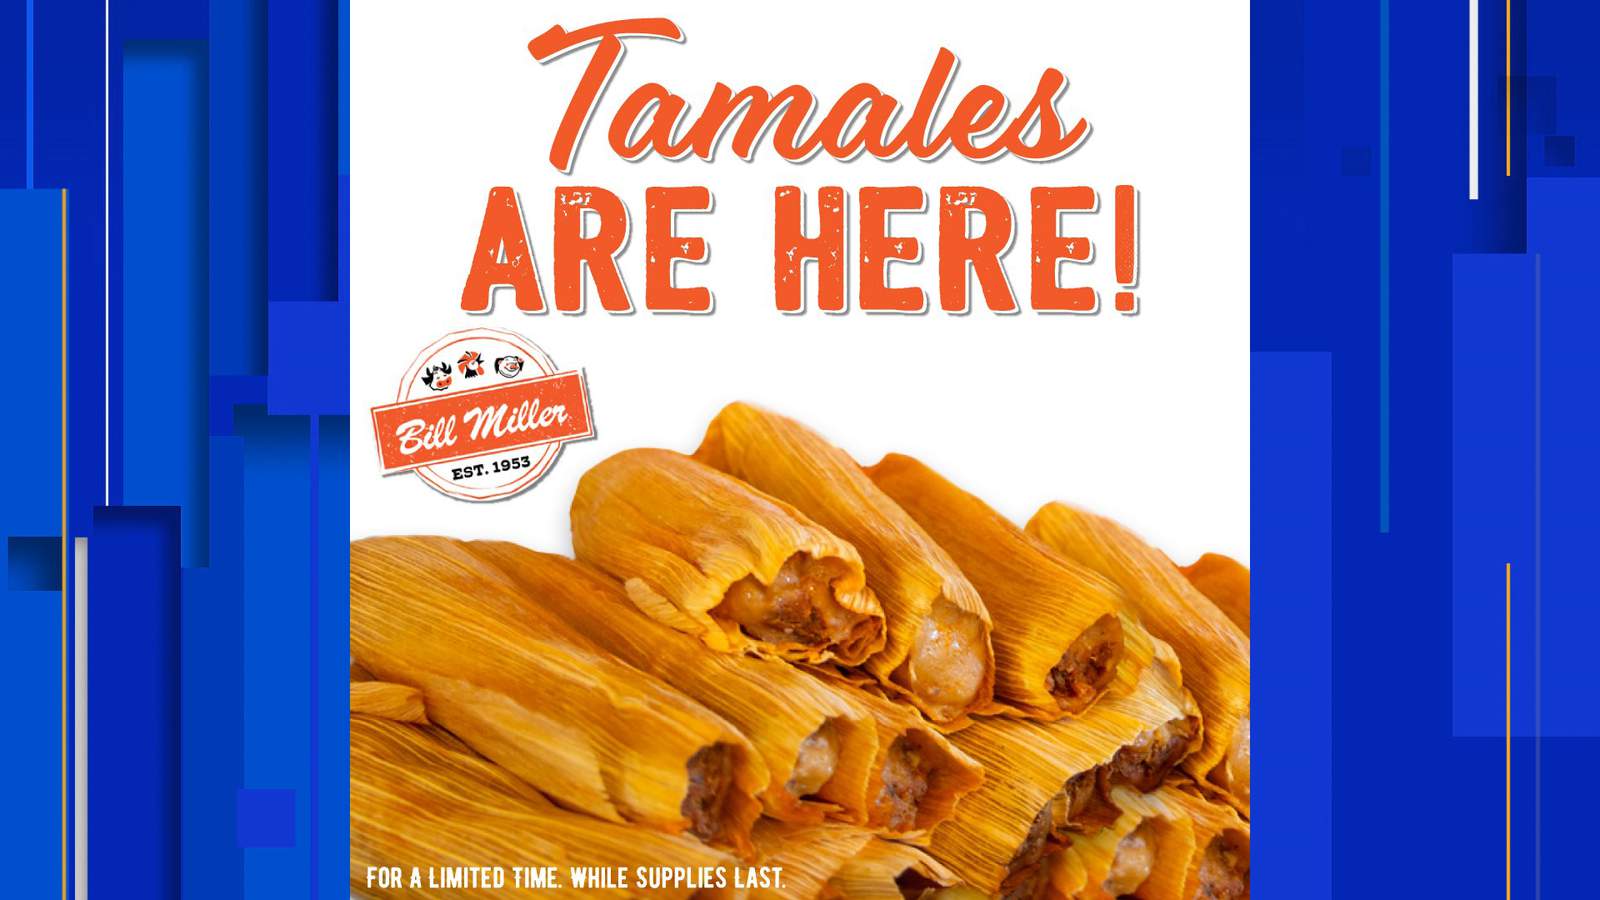 Tamales are back at Bill Miller Bar-B-Q for a limited time